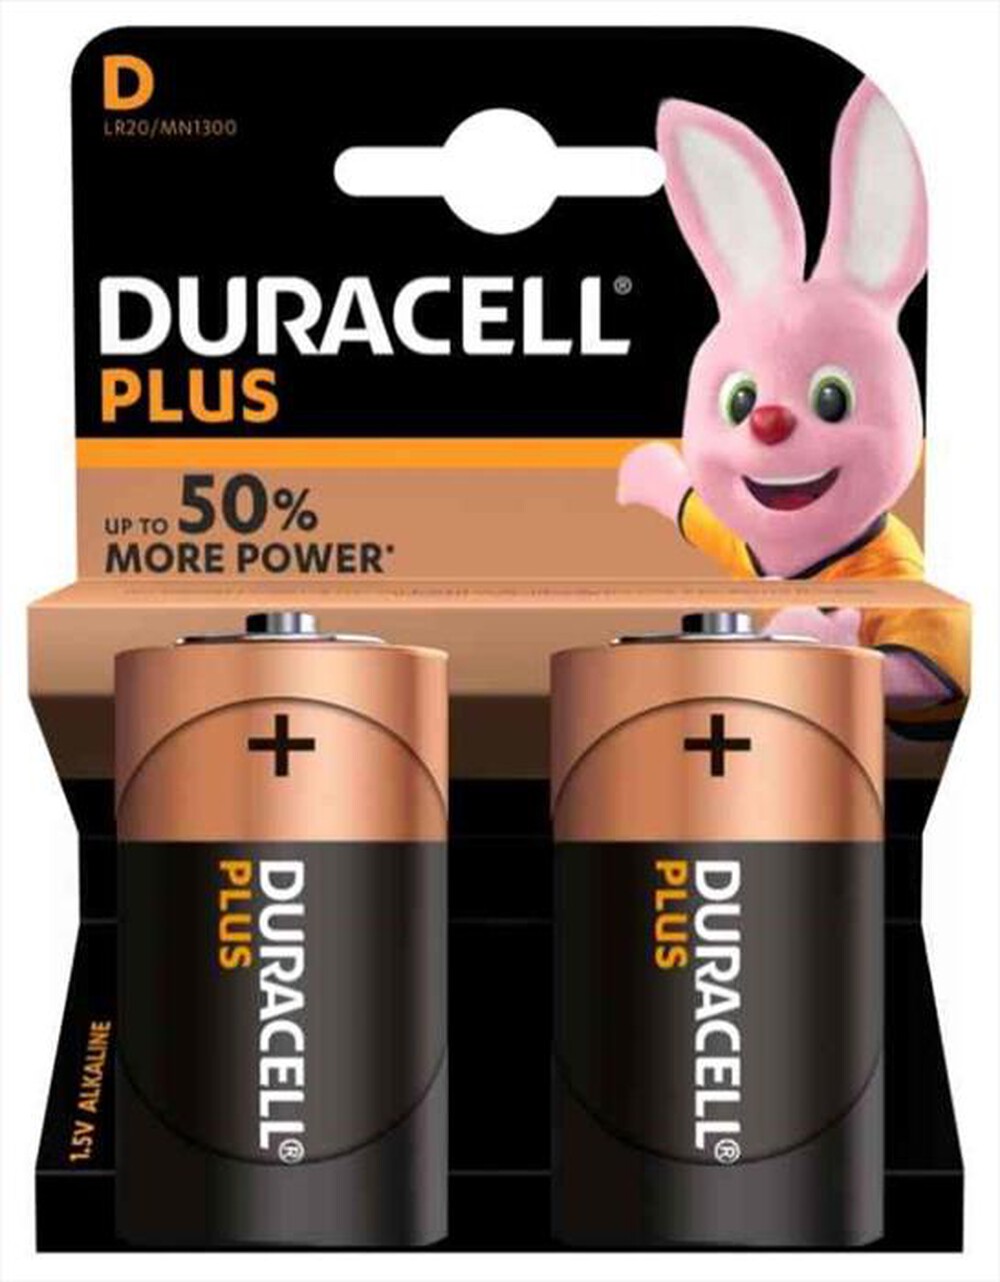 "DURACELL - PLUS POWER TORCI"